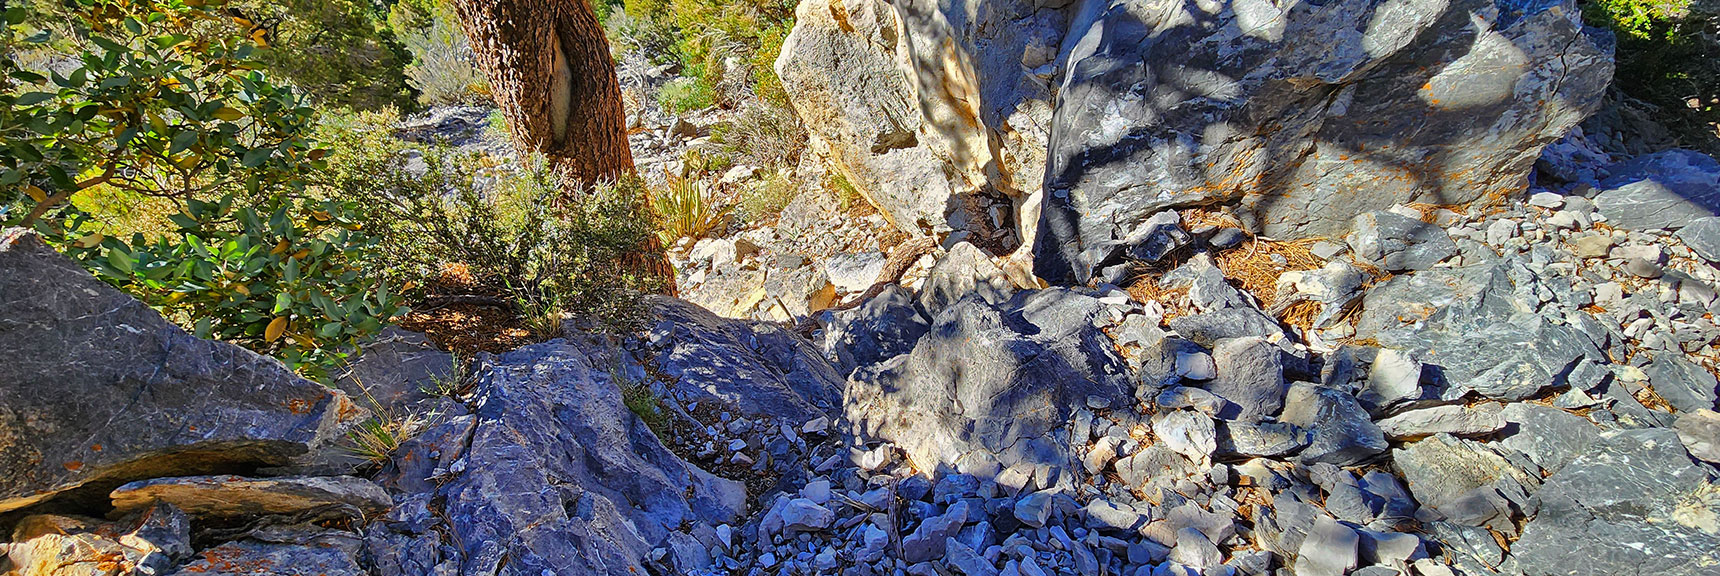 One Brief 12ft Class 3 Section is Aided by Rock Stairs, Well Placed. | Fletcher Canyon / Fletcher Peak / Cockscomb Ridge Circuit | Mt. Charleston Wilderness | Spring Mountains, Nevada